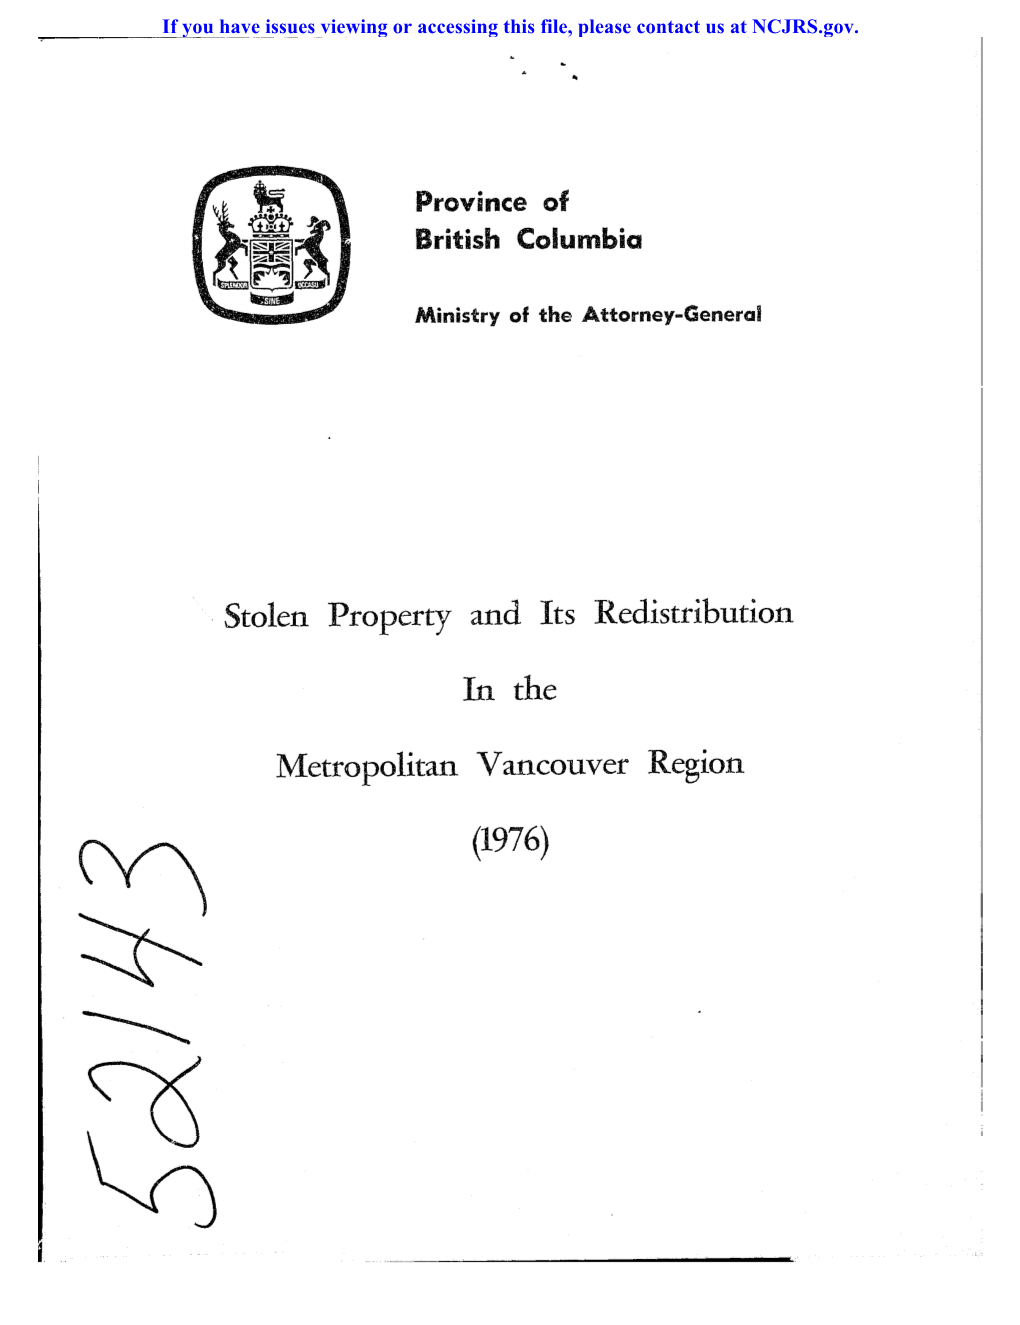 Stolen Property and Its Redistribution in the Metropolitan Vancouver Region (1976)